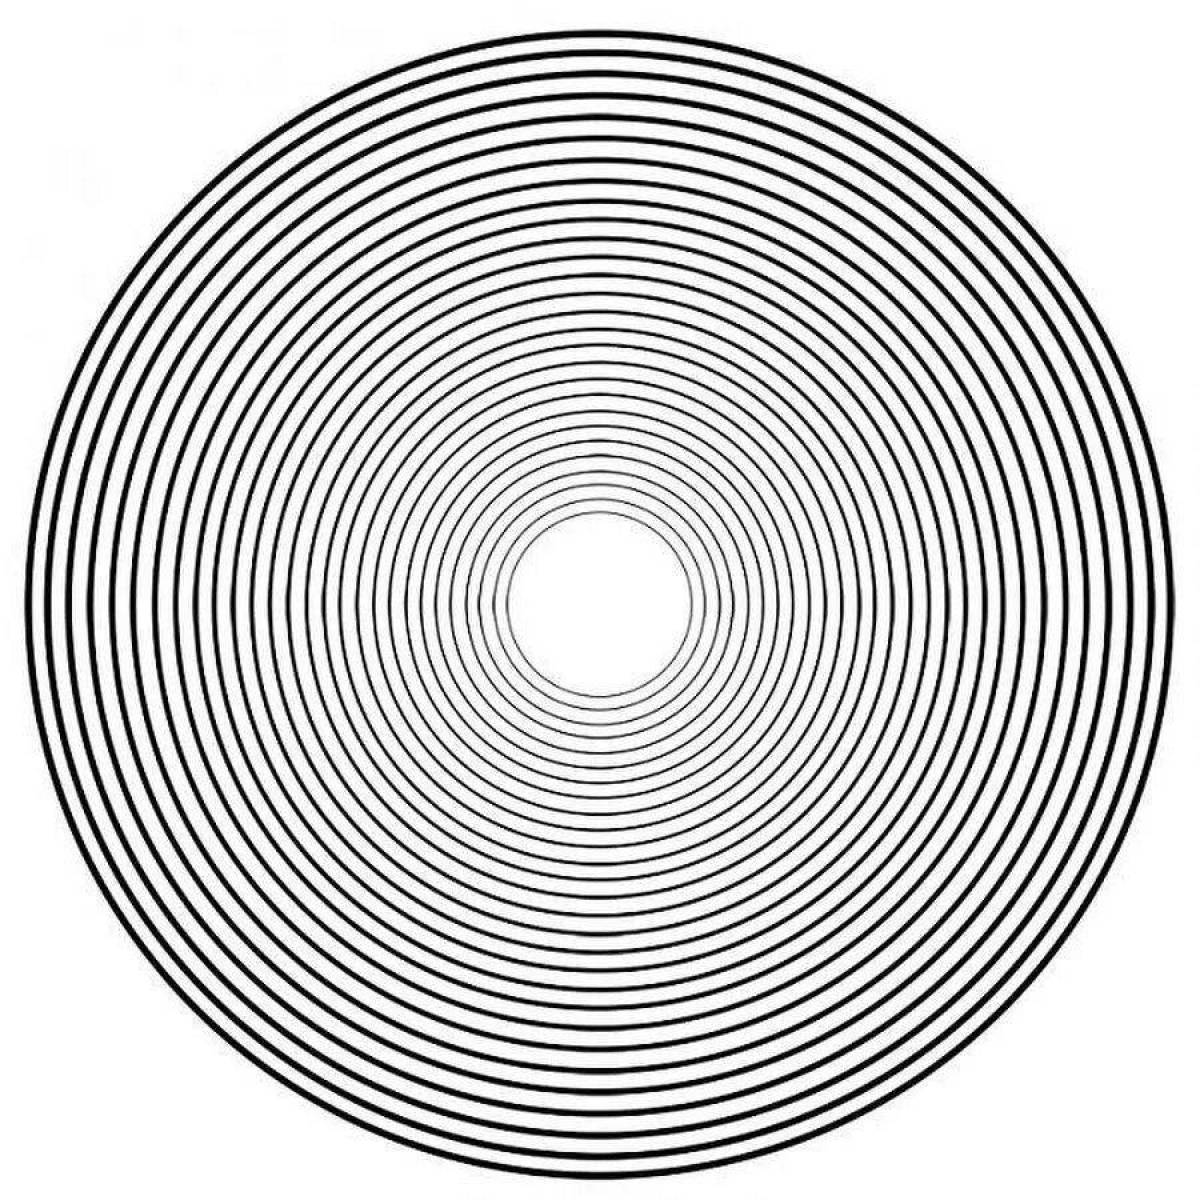 Coloring page unusual striped circle